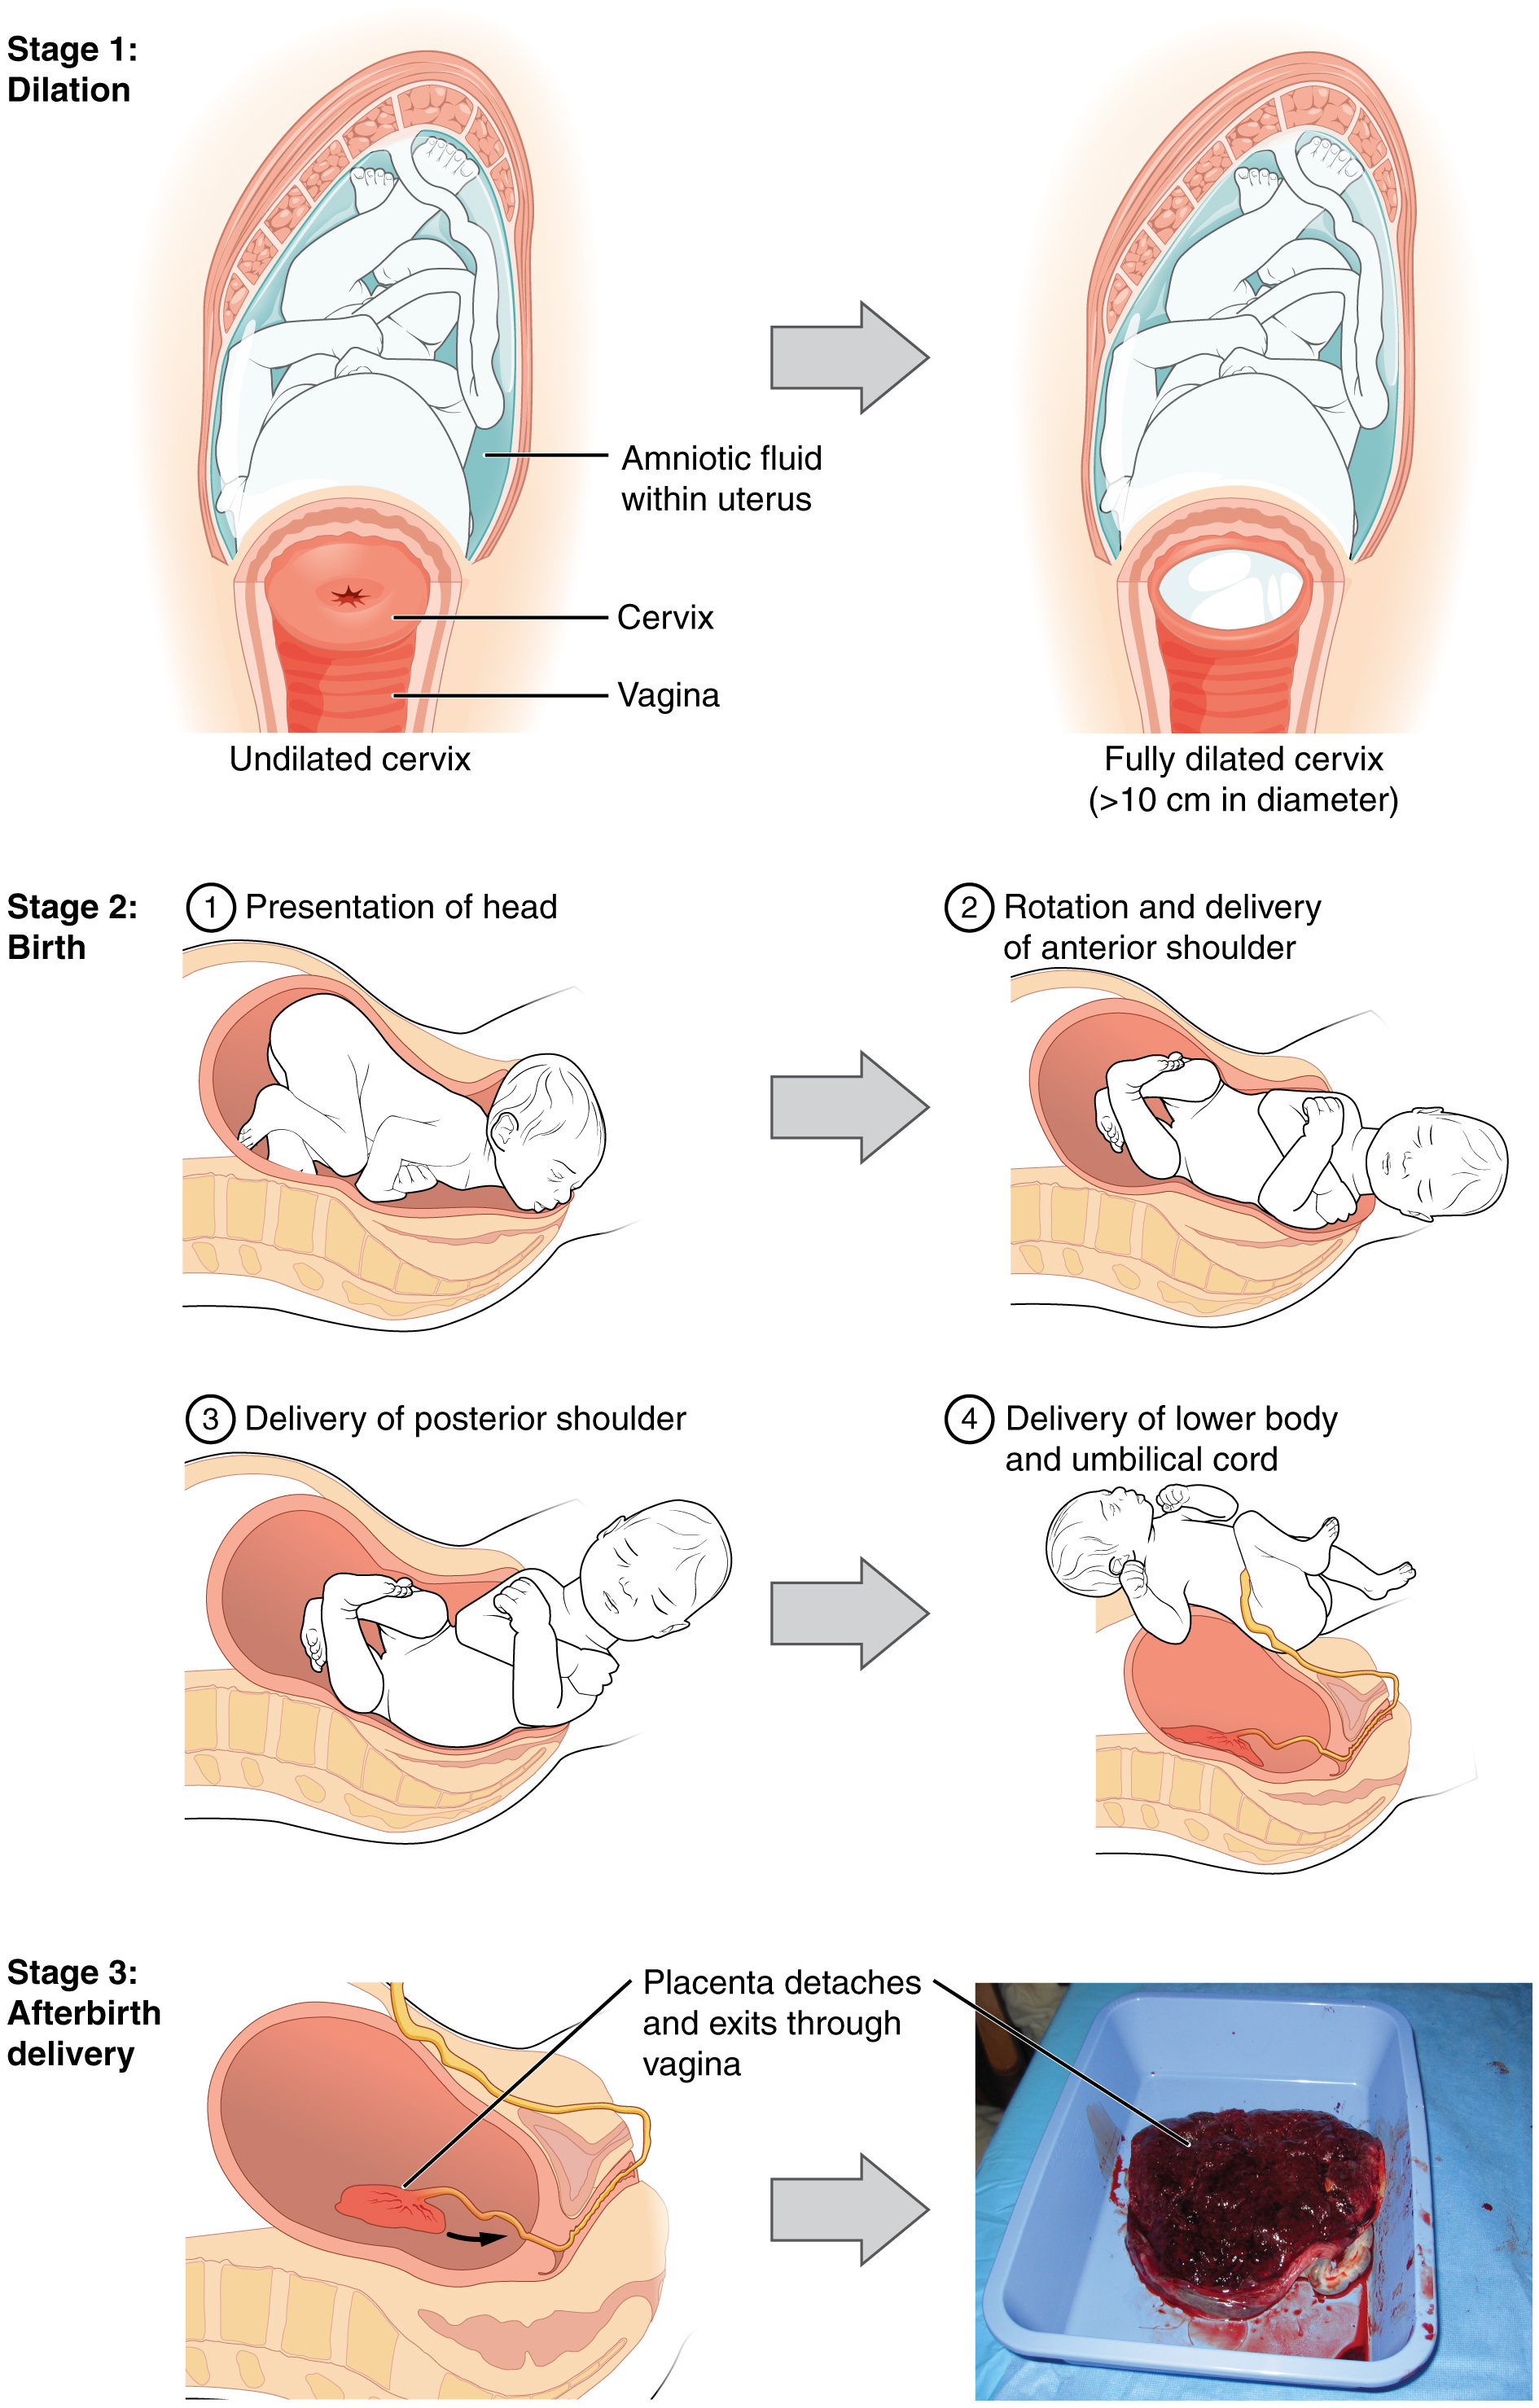 This multi-part figure shows the different stages of childbirth. The top panel shows dilation, the middle panel shows birth and the bottom panel shows afterbirth delivery.